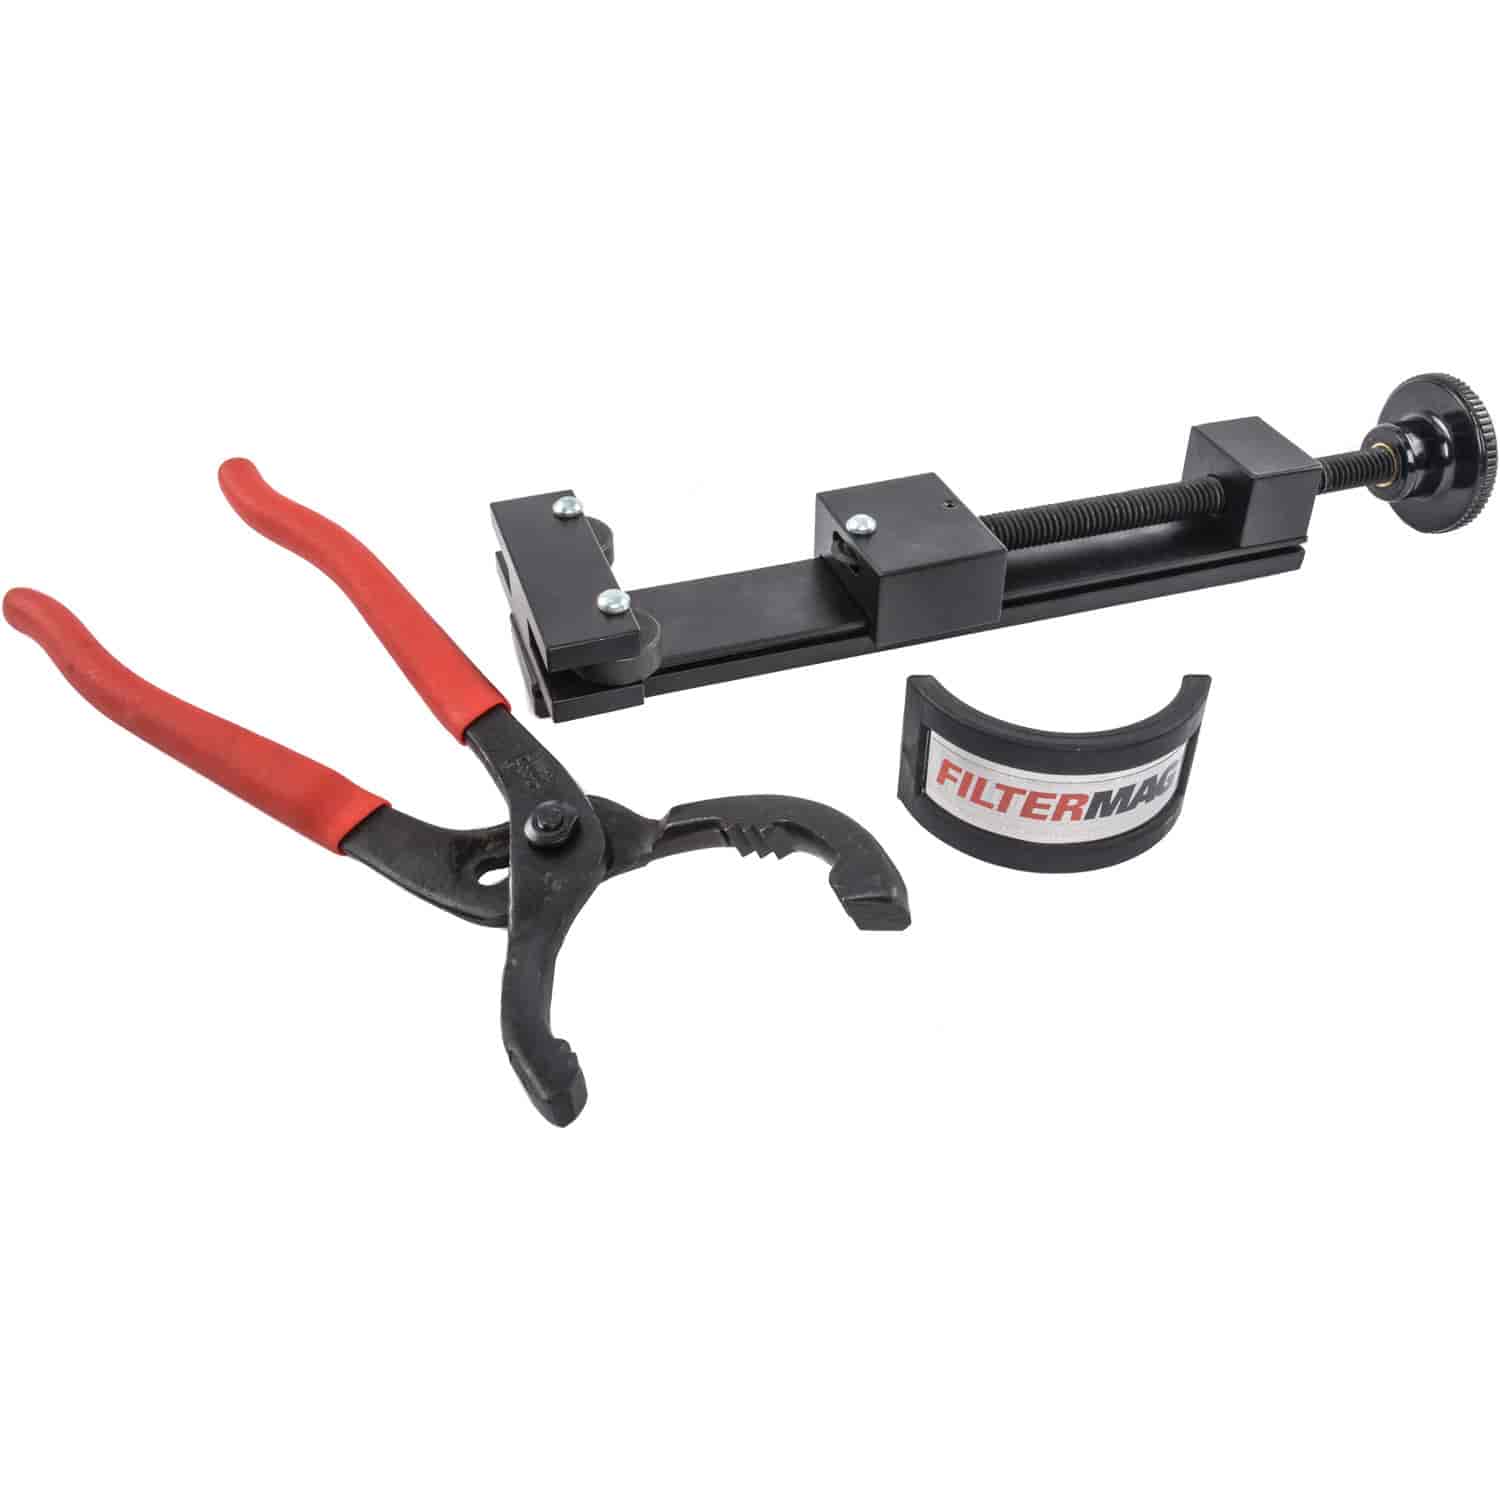 SS FilterMag Kit Includes oil FilterMag, oil filter cutting tool and oil filter pliers